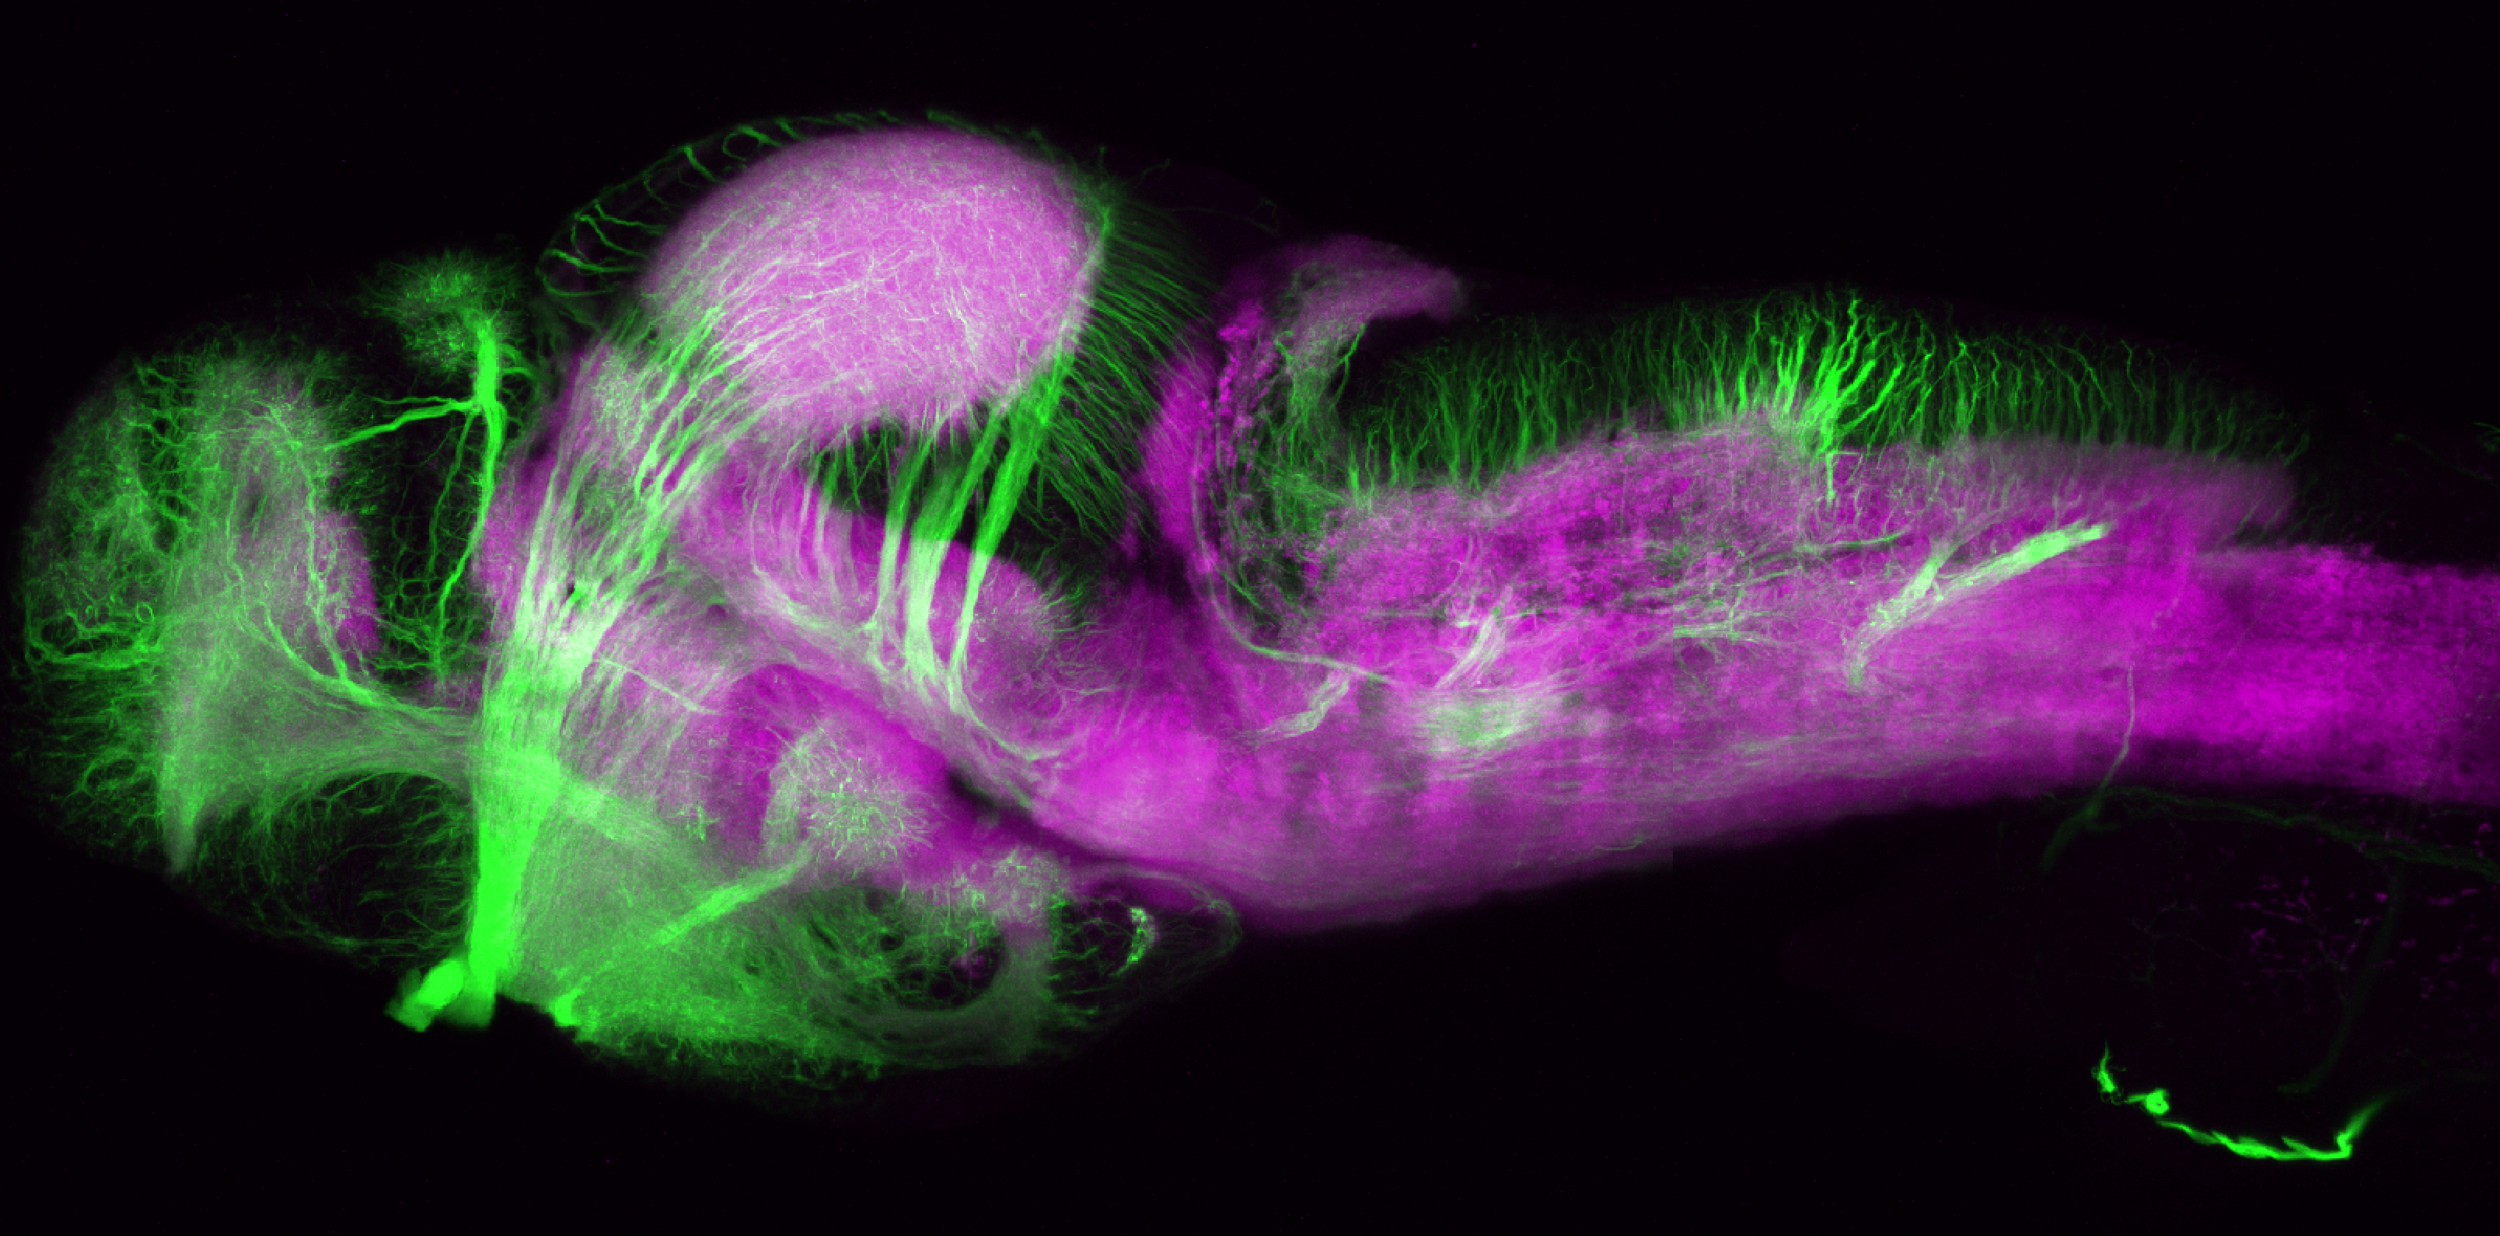 SV2 (magenta) and tubulin (green) lateral view of whole brain at 4dpf